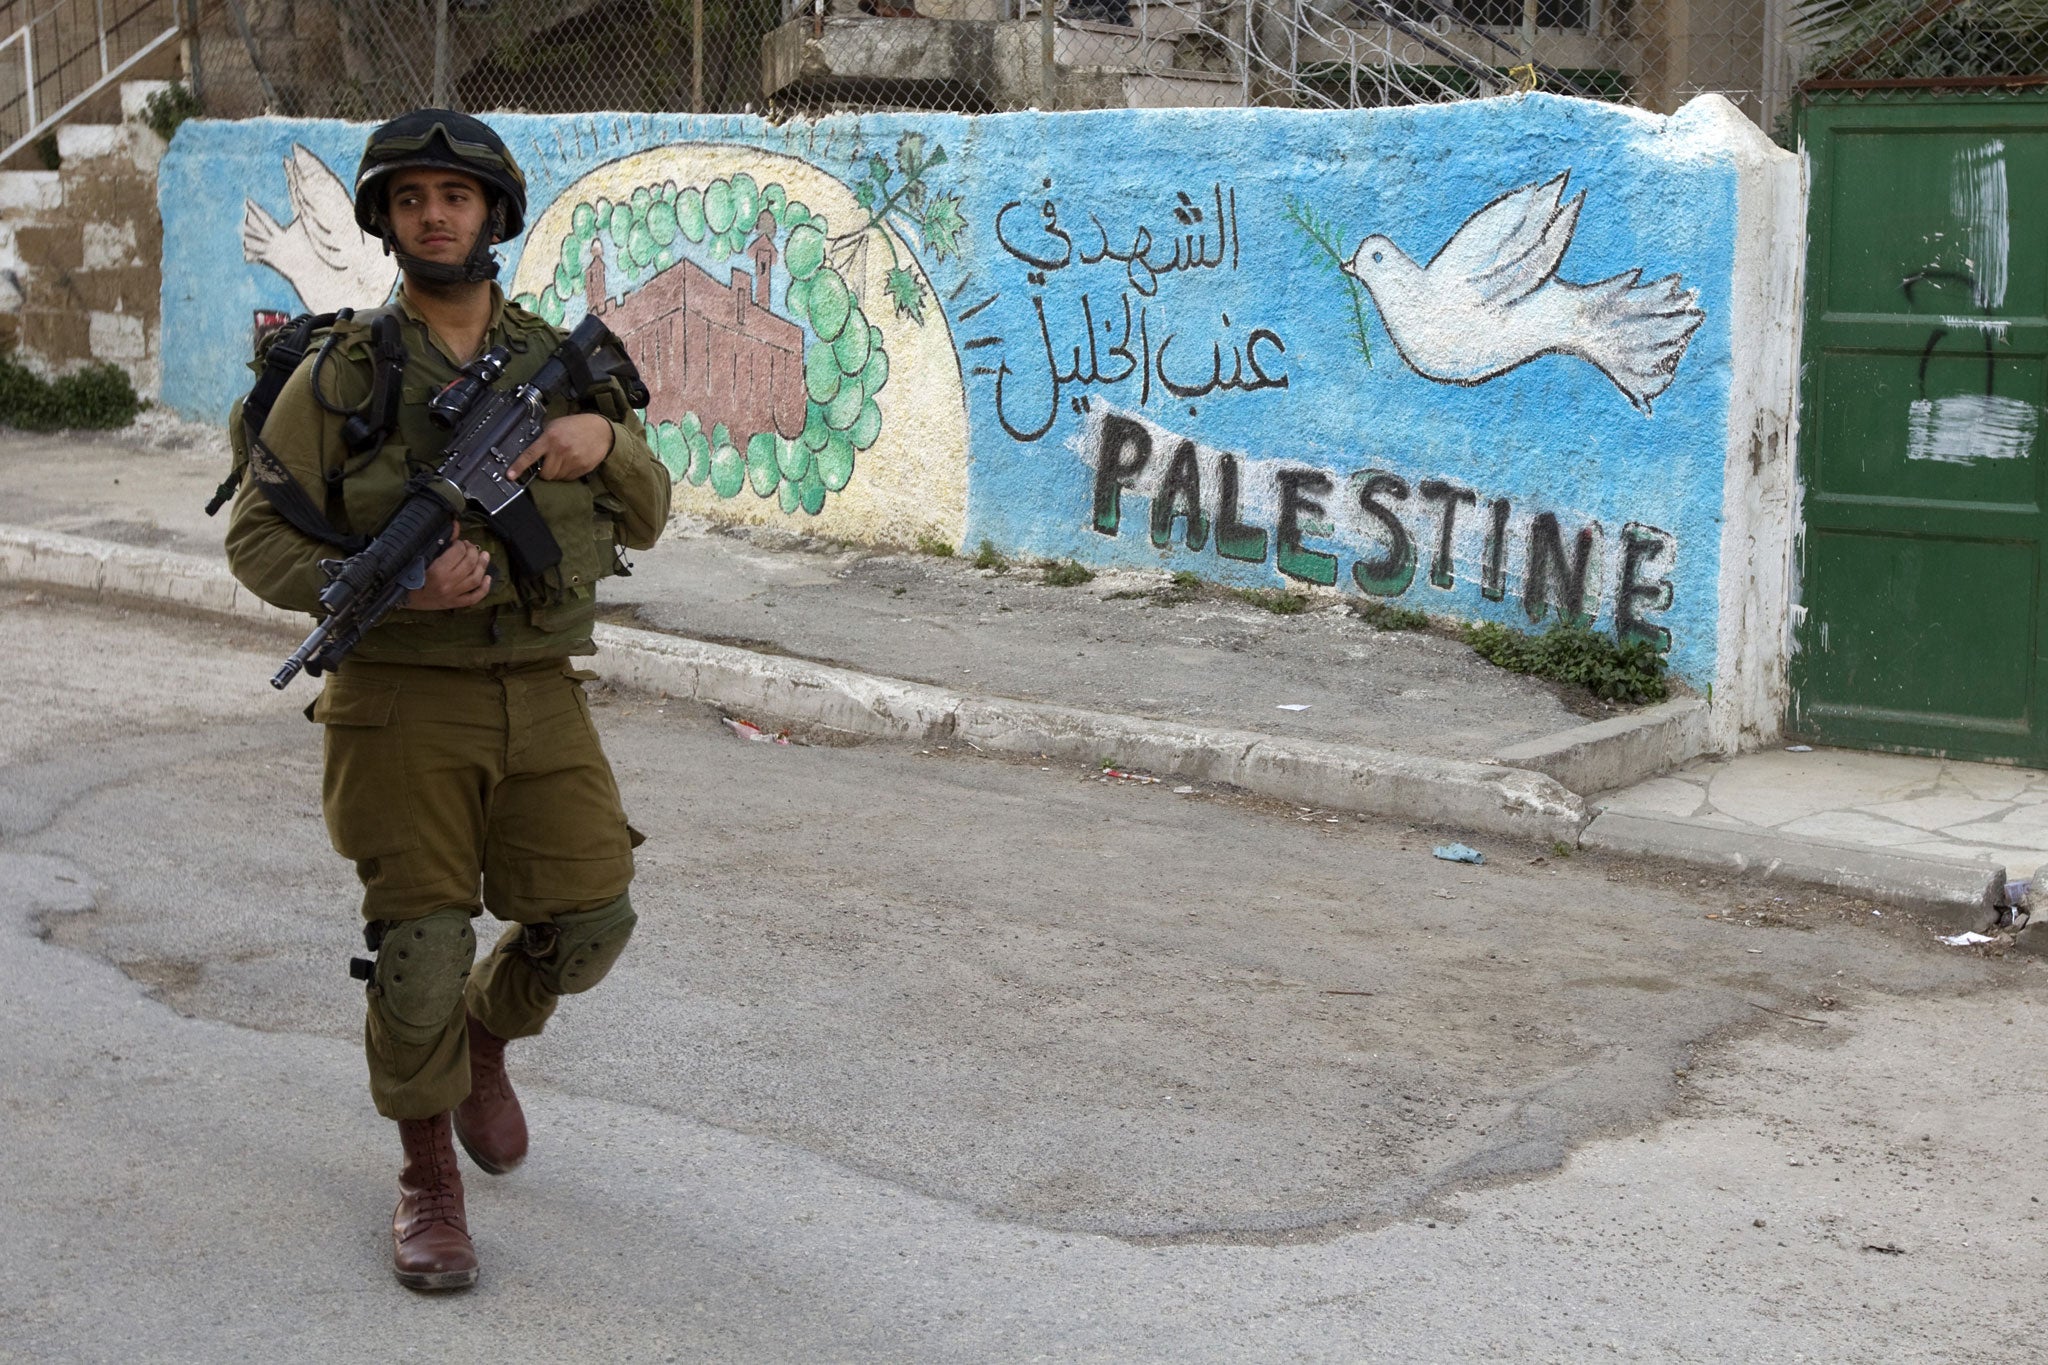 An Israeli soldier patrols near a Palestinian house in the centre of Hebron in the occupied West Bank on April 3, 2012